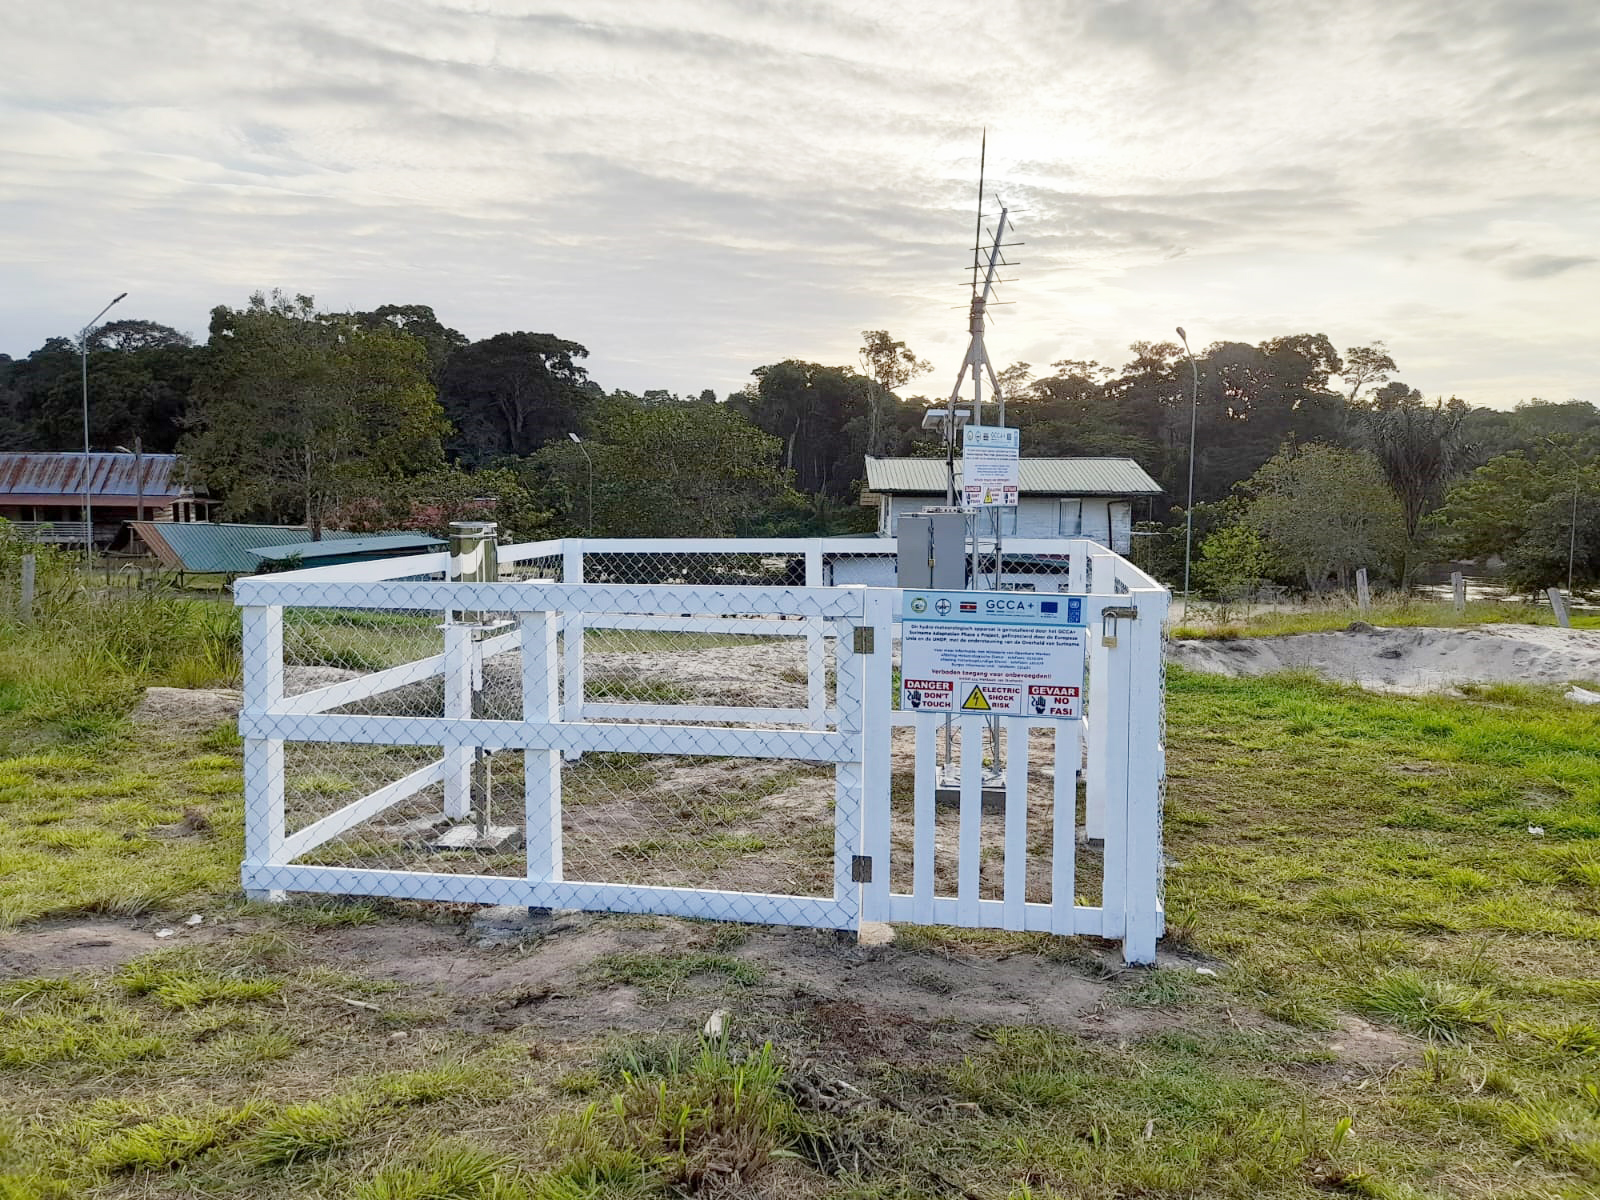 The installed Automatic Weather Stations (AWS) at Poesoegroenoe, Suriname